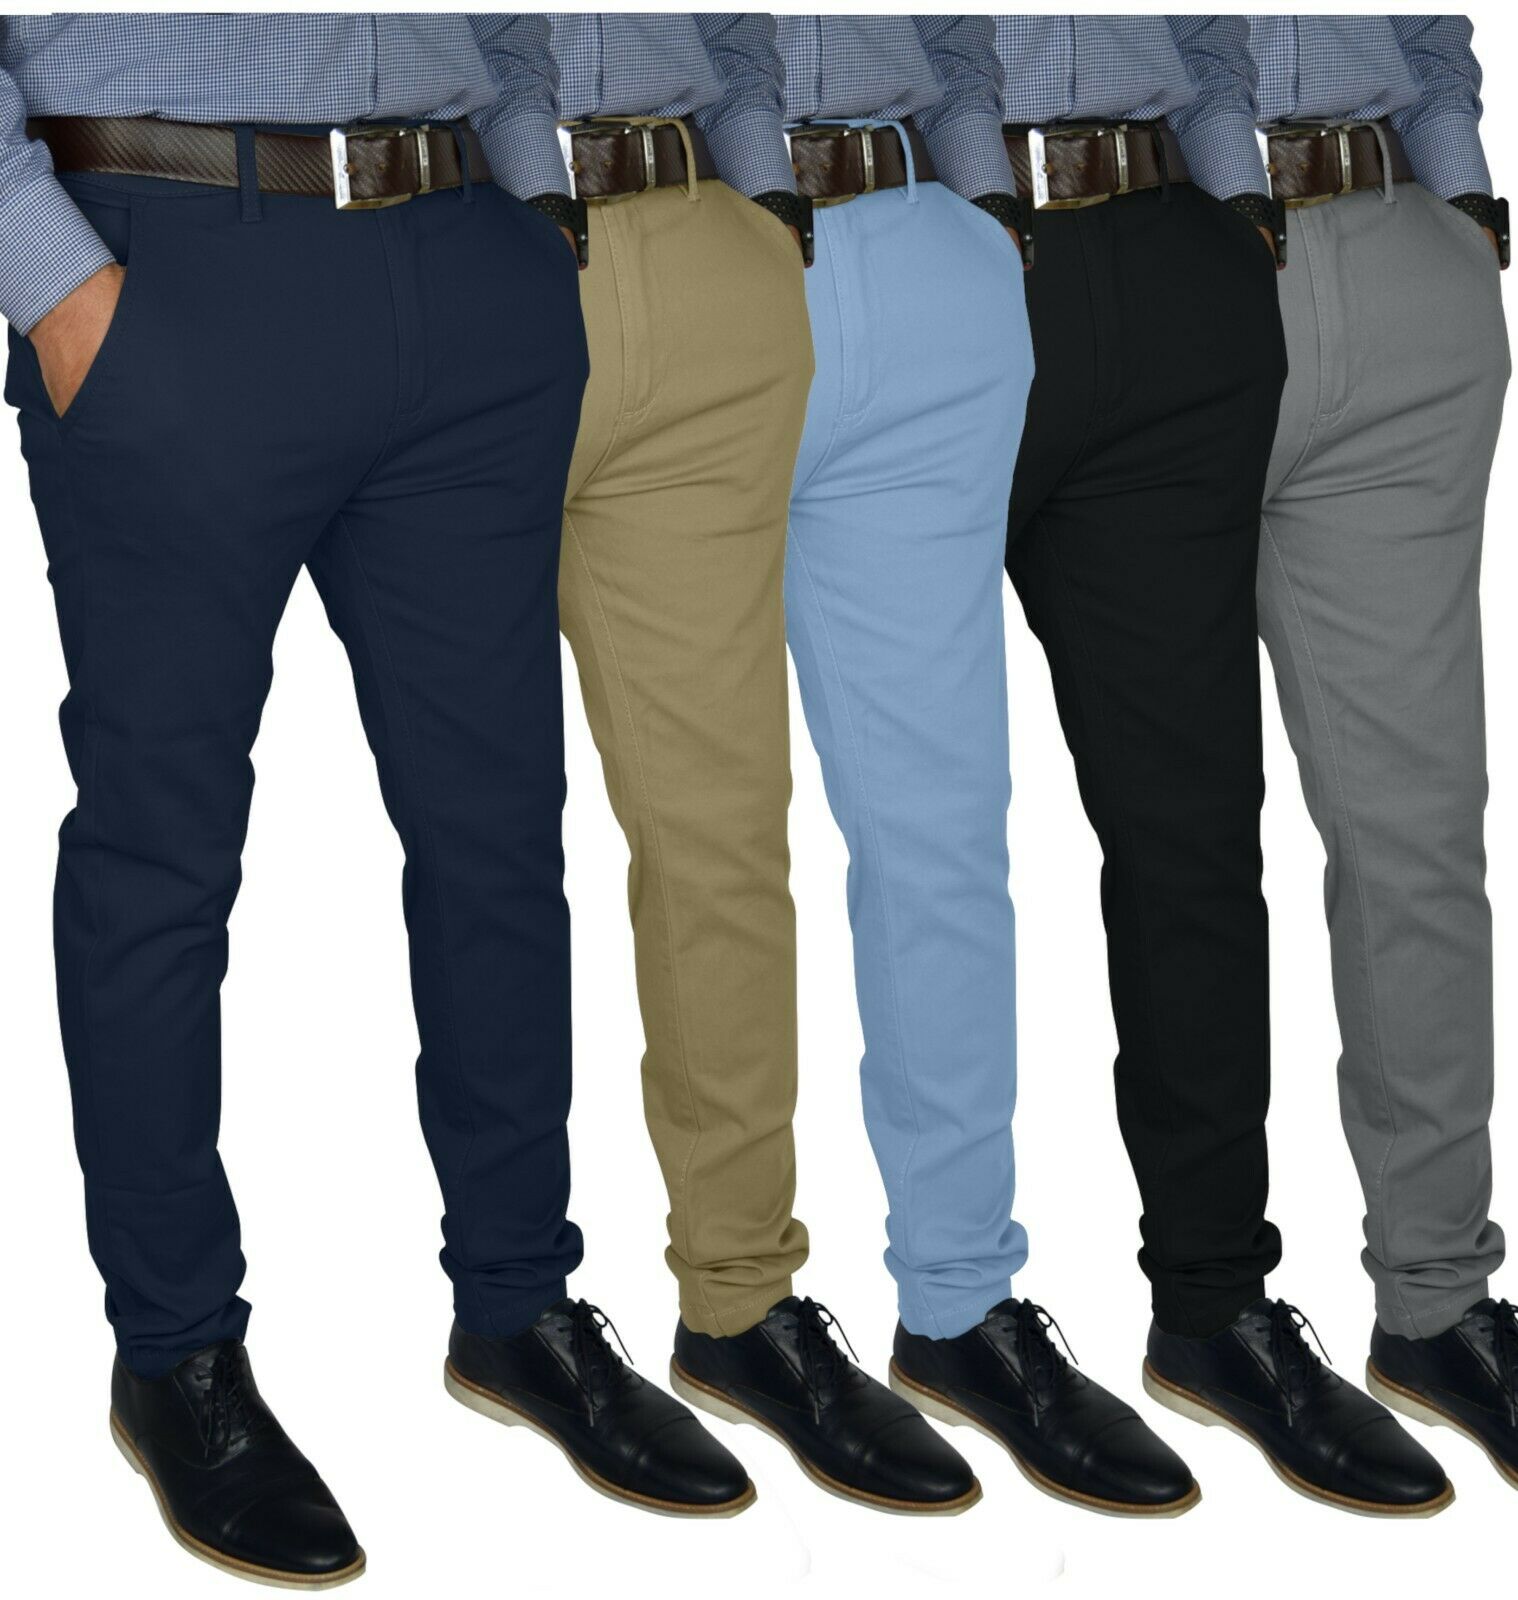 Mens Slim Fit Stretch Chino Trousers Casual Flat Front Flex Full Pants